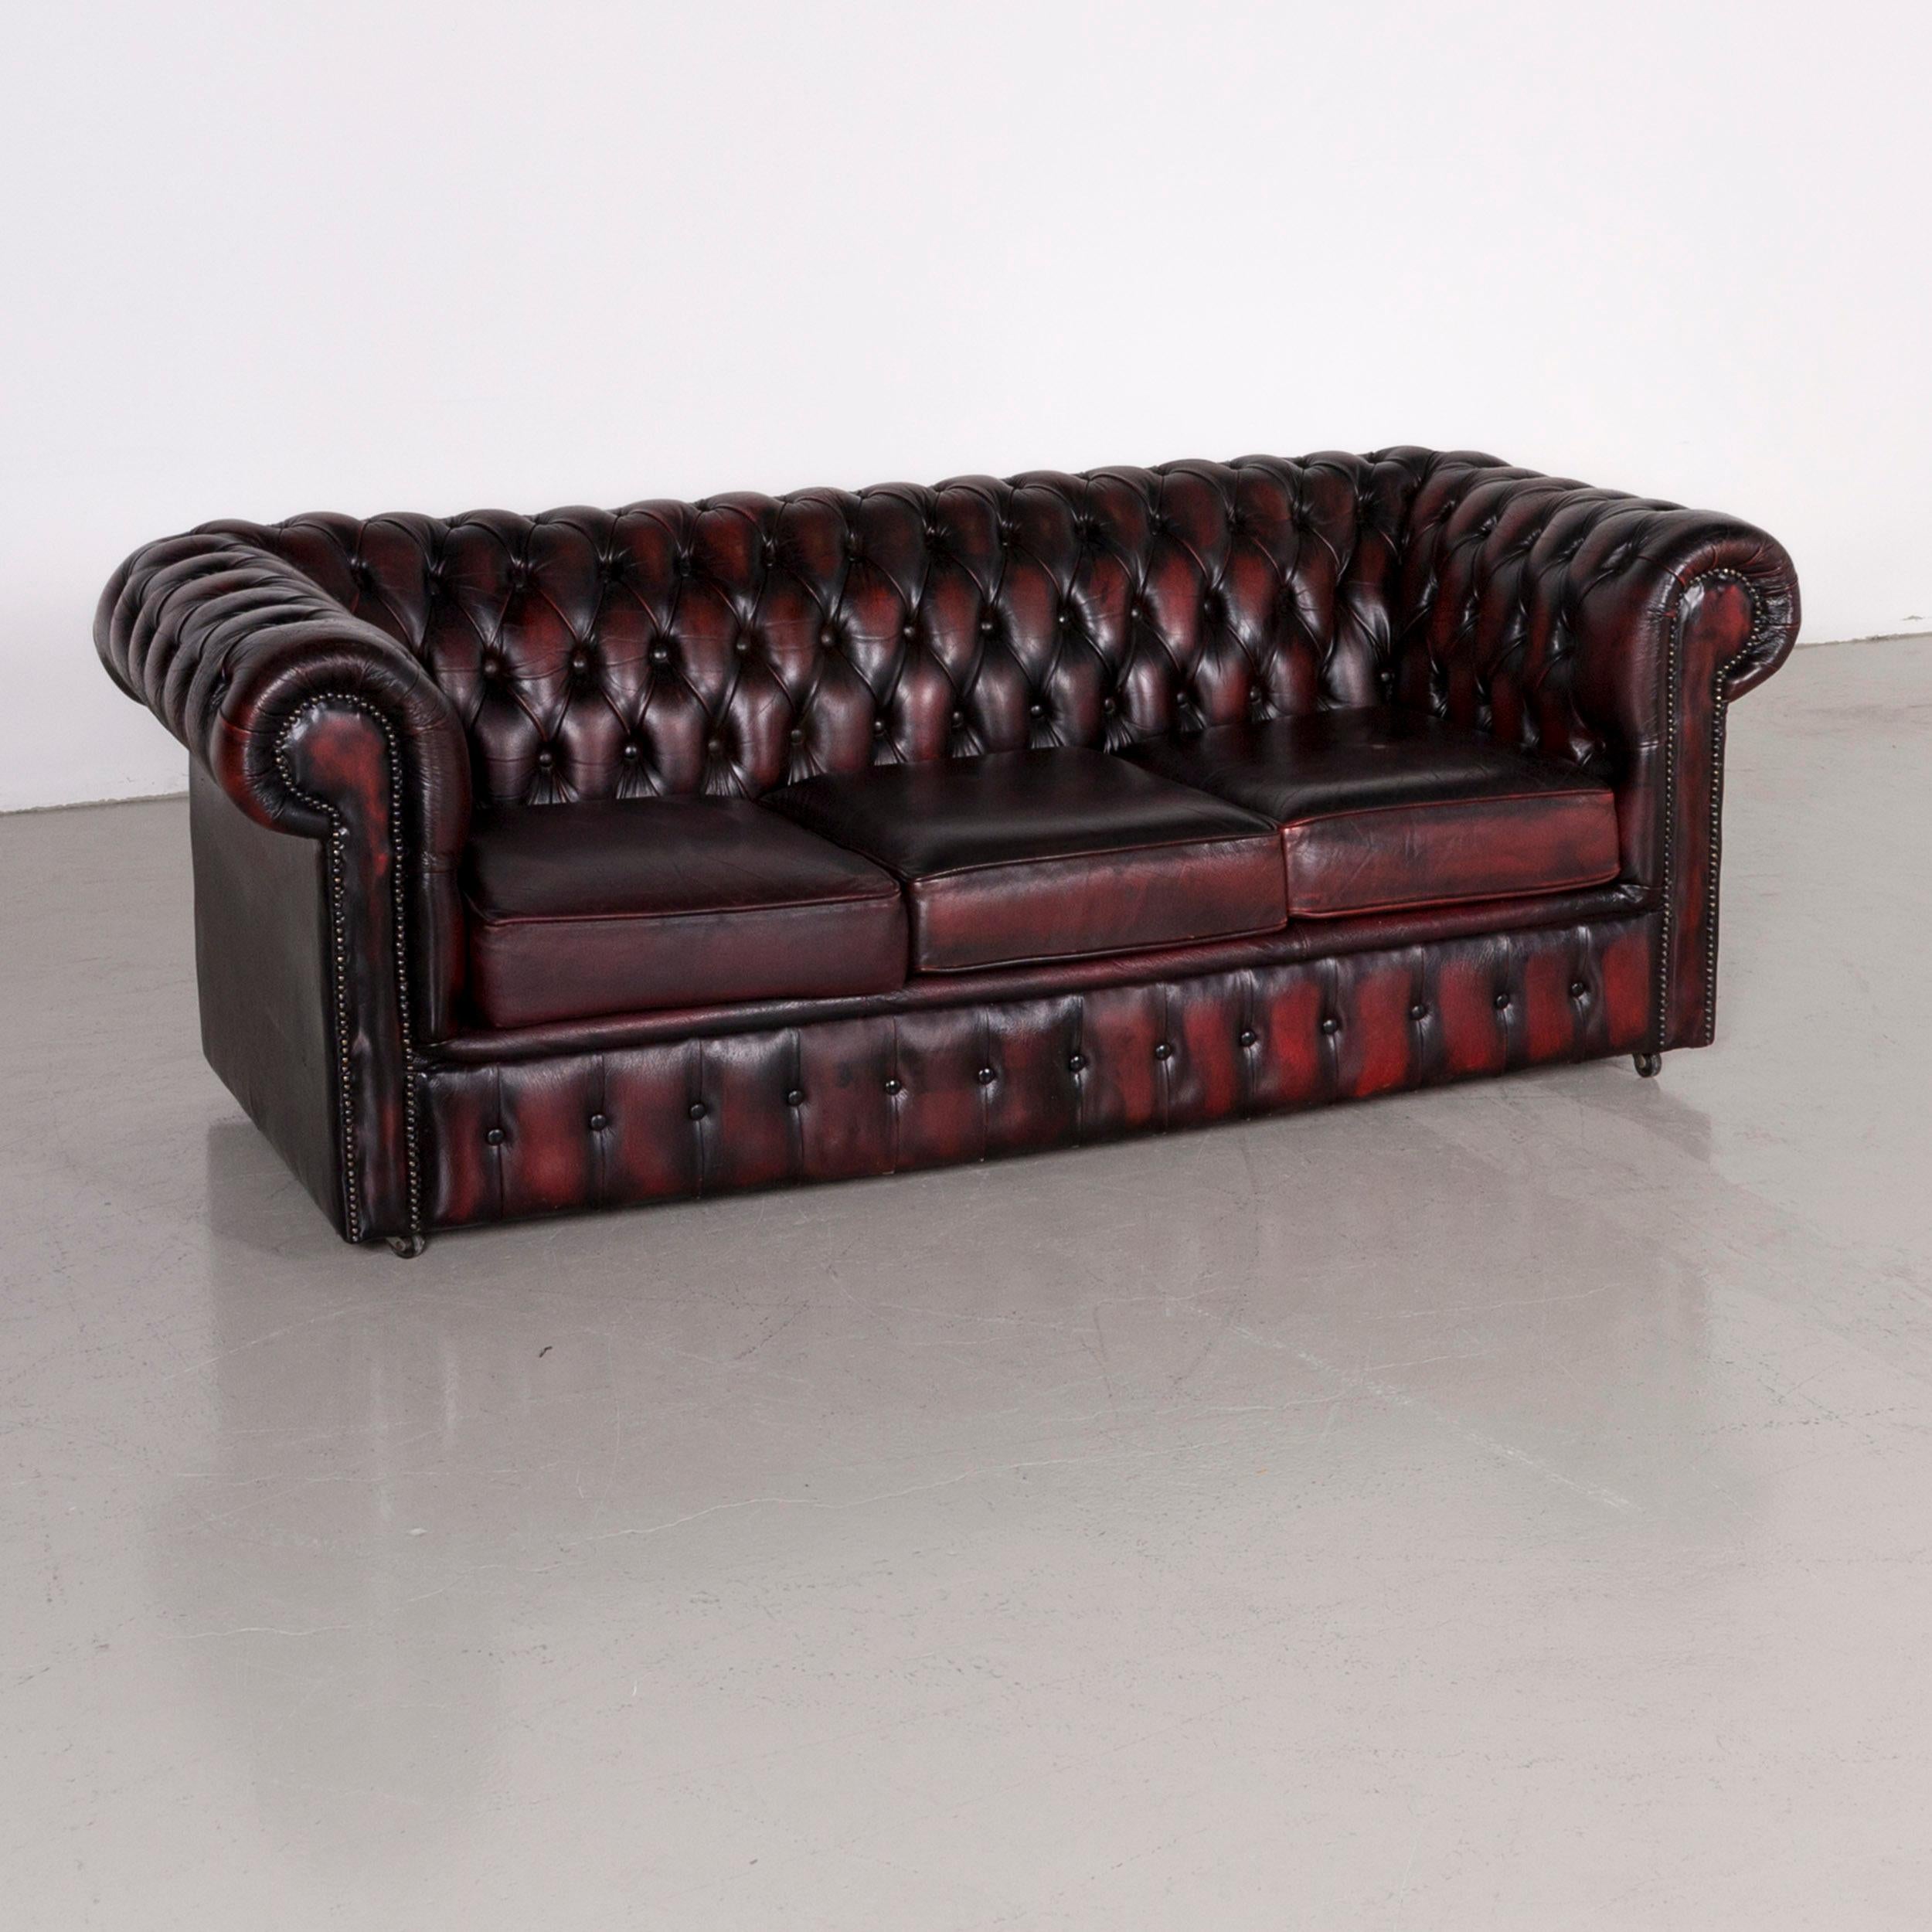 Chesterfield leather sofa red vintage two-seat couch.